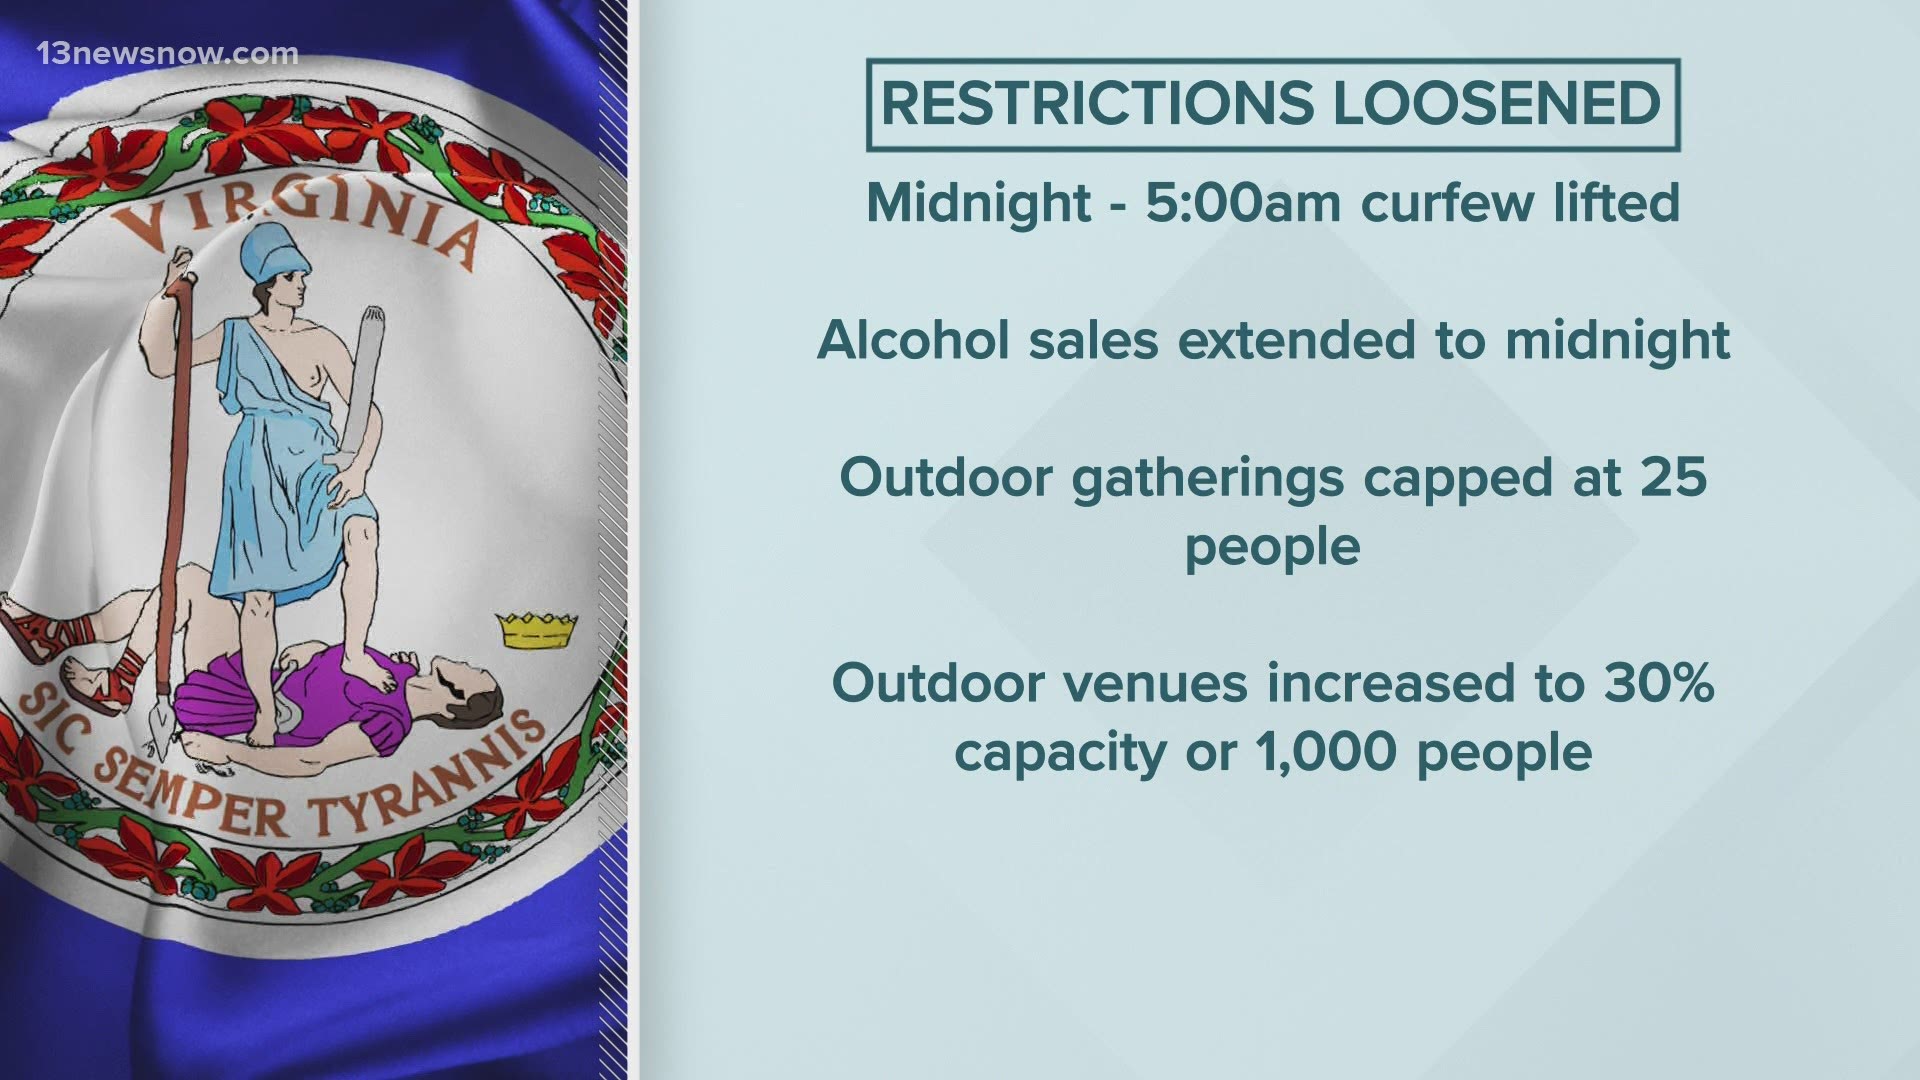 The midnight to 5 a.m. curfew will be lifted in the state Alcohol sales will be extended to midnight.